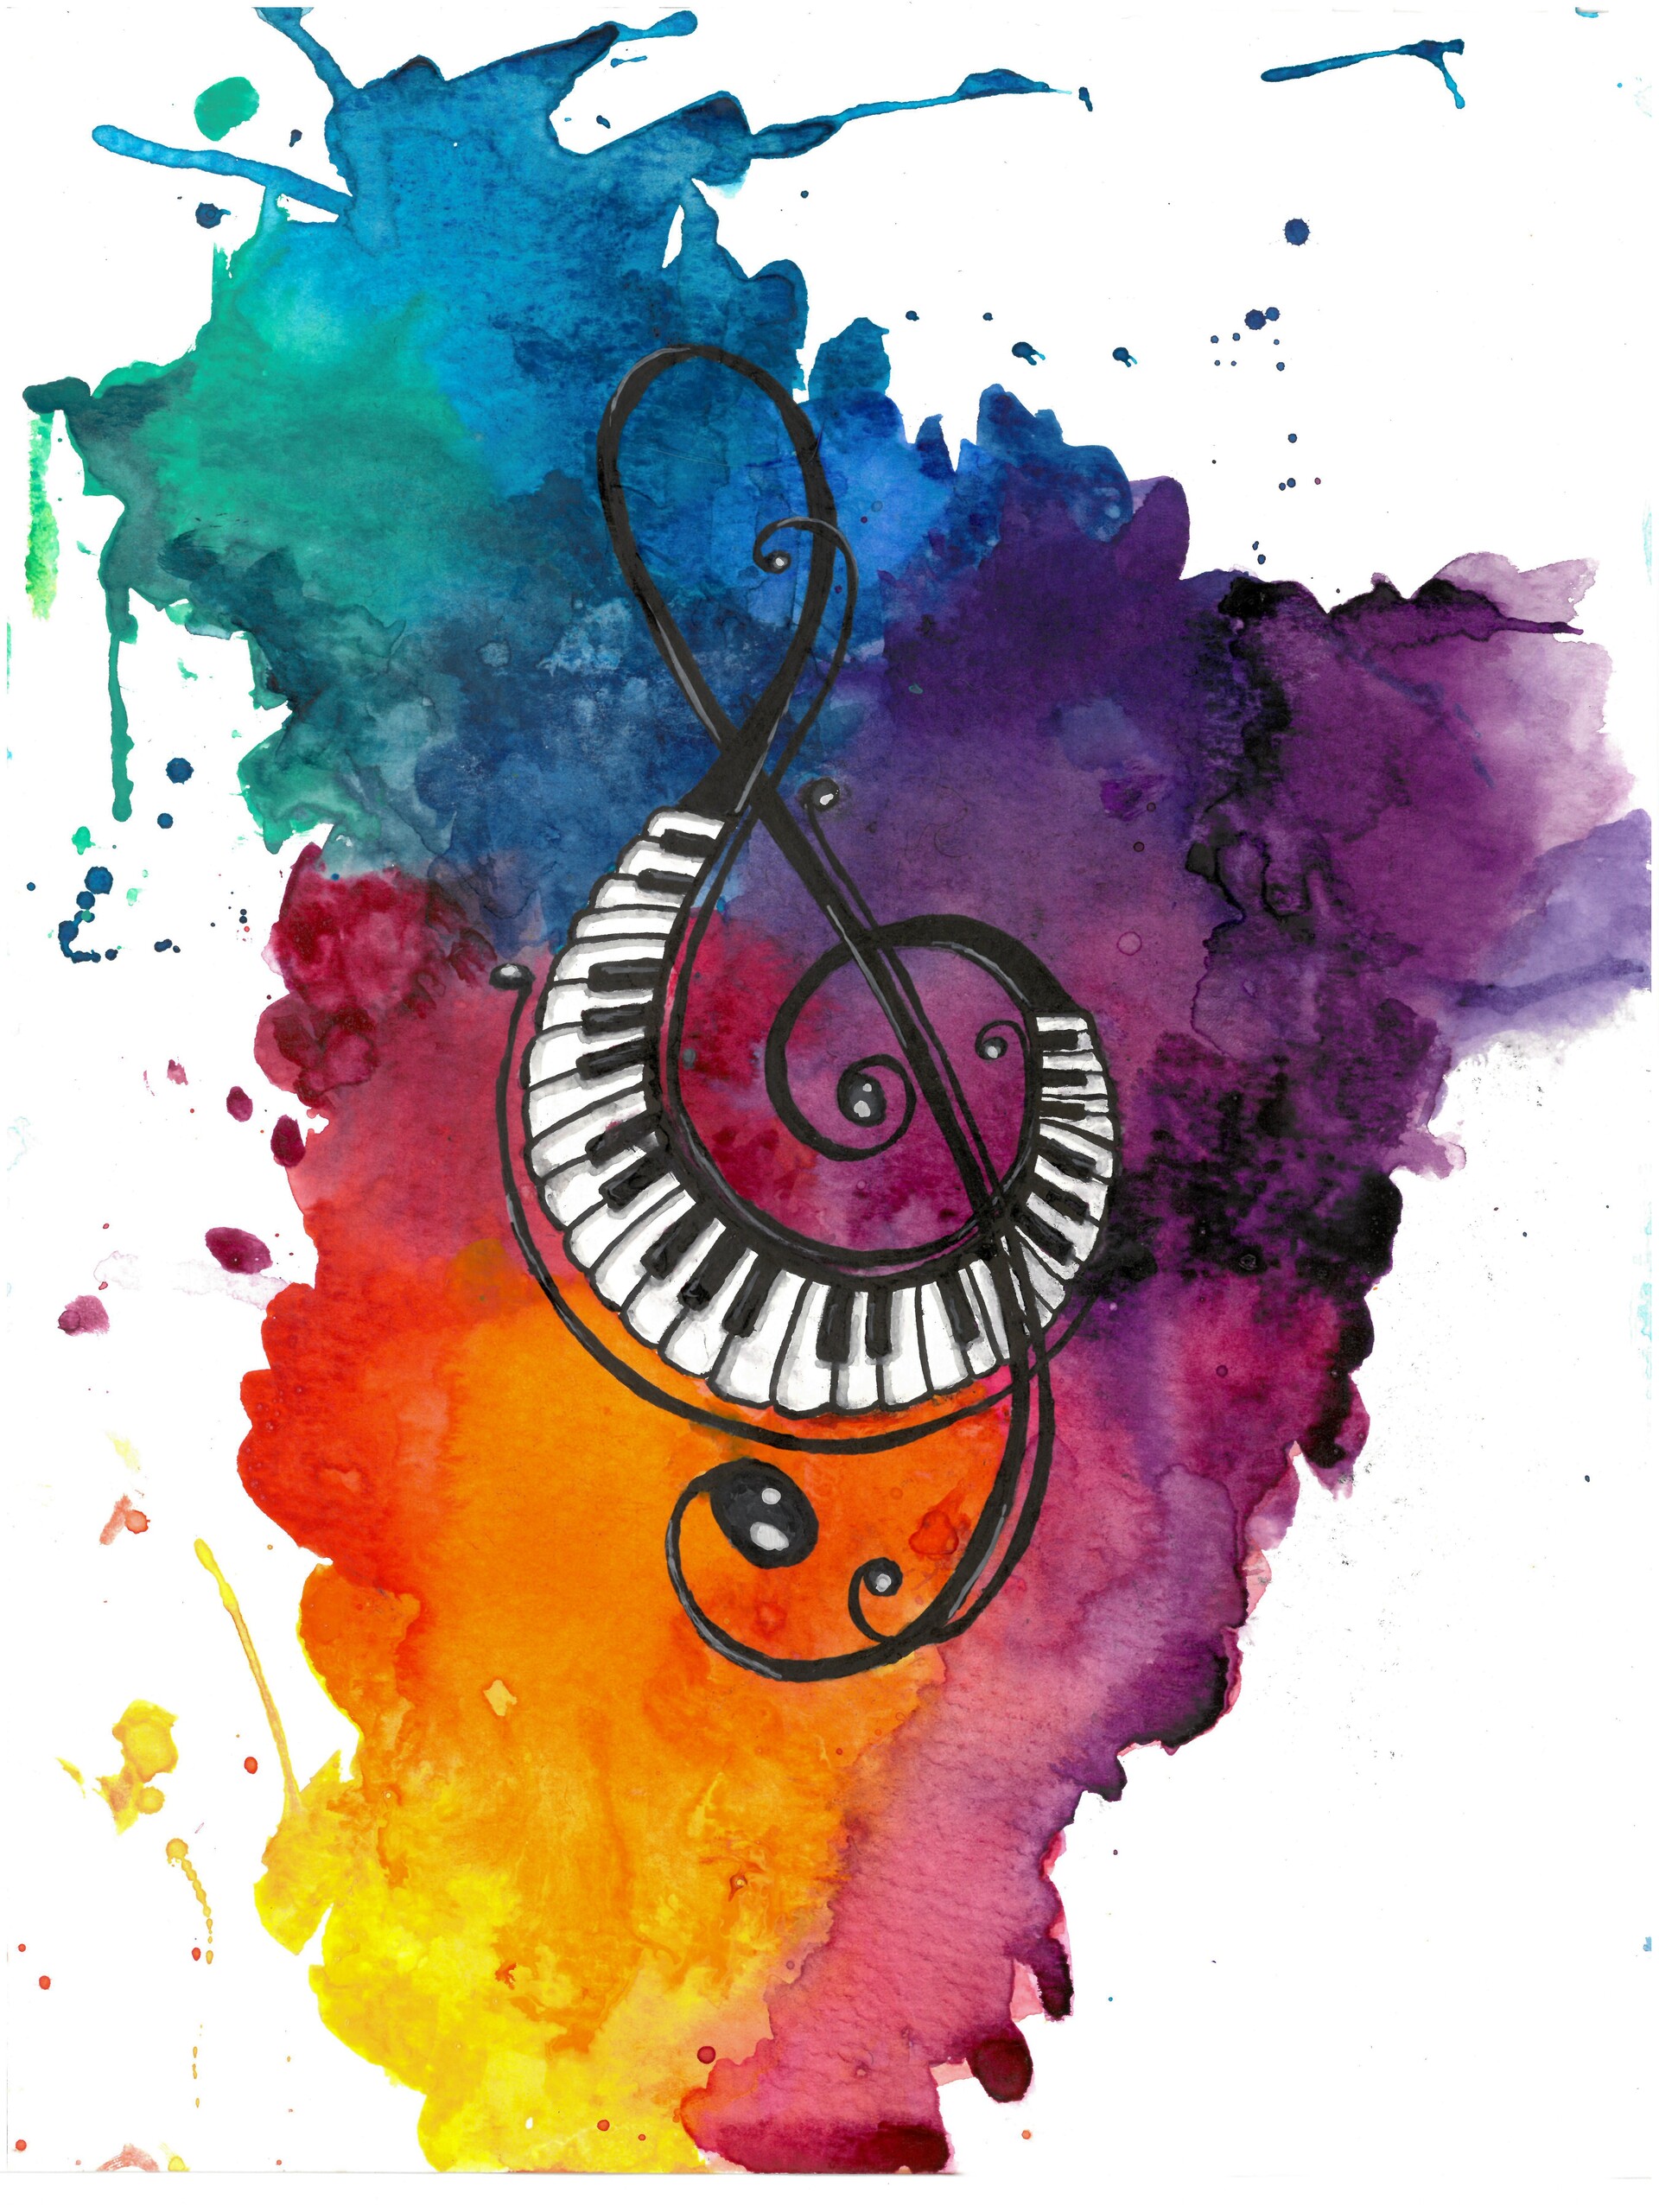 Abstract Art: Painting Music With Watercolours & Ink